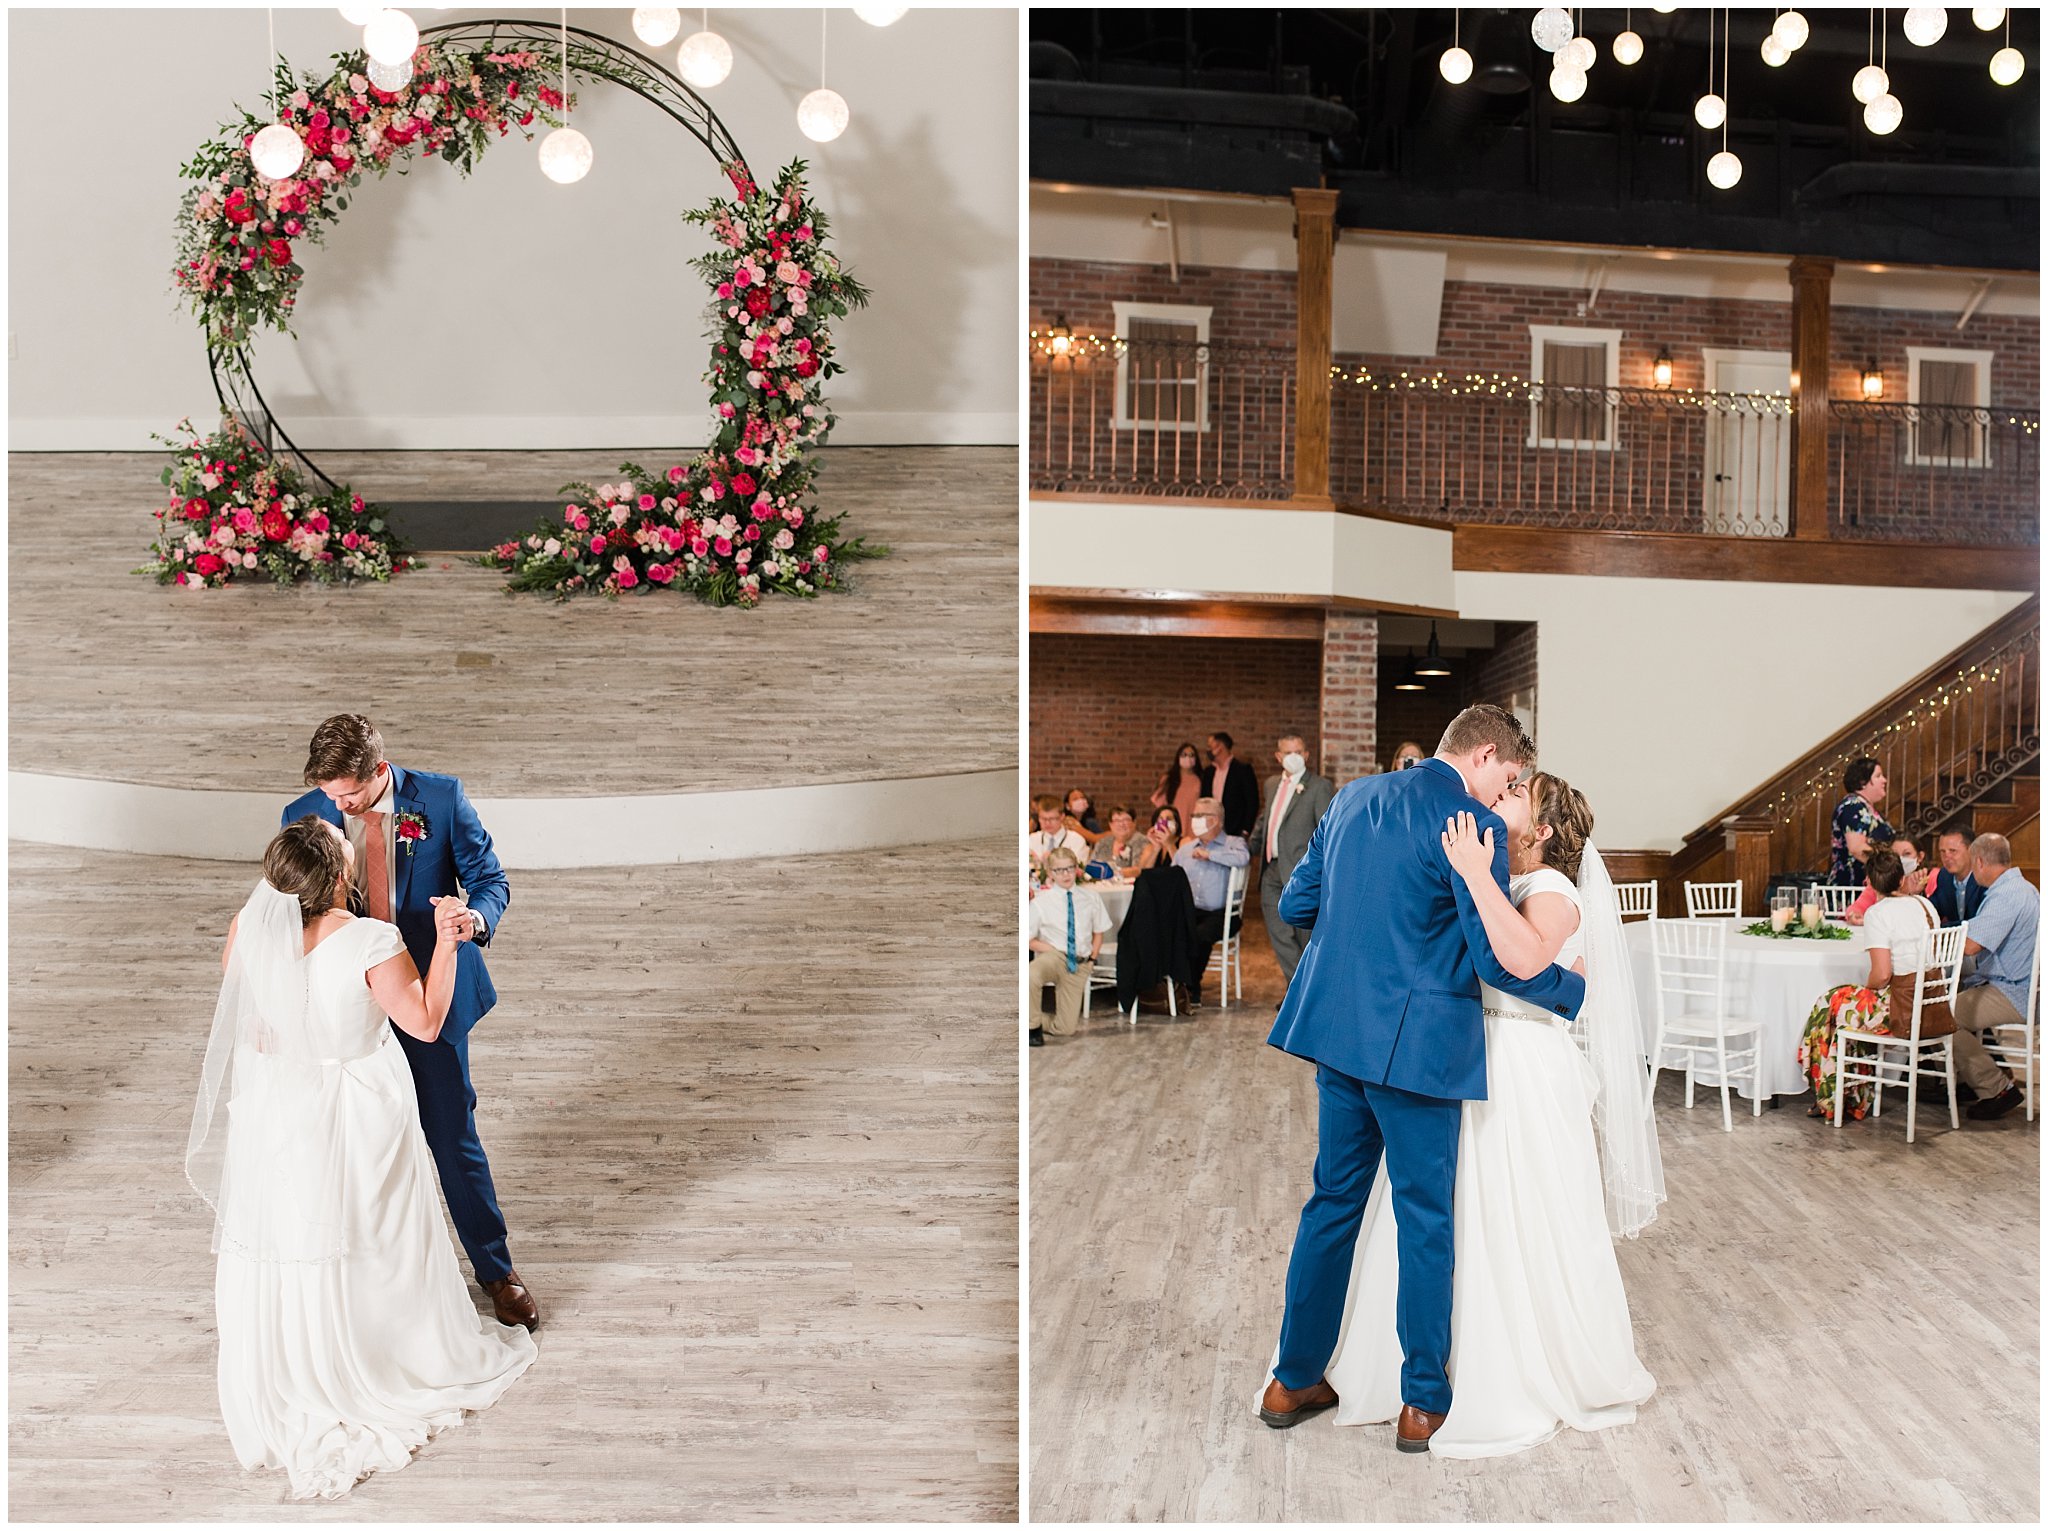 Bride and groom dance underneath chandelier with flowy dress and cornish blue suit | Talia Event Center Summer Wedding | Jessie and Dallin Photography